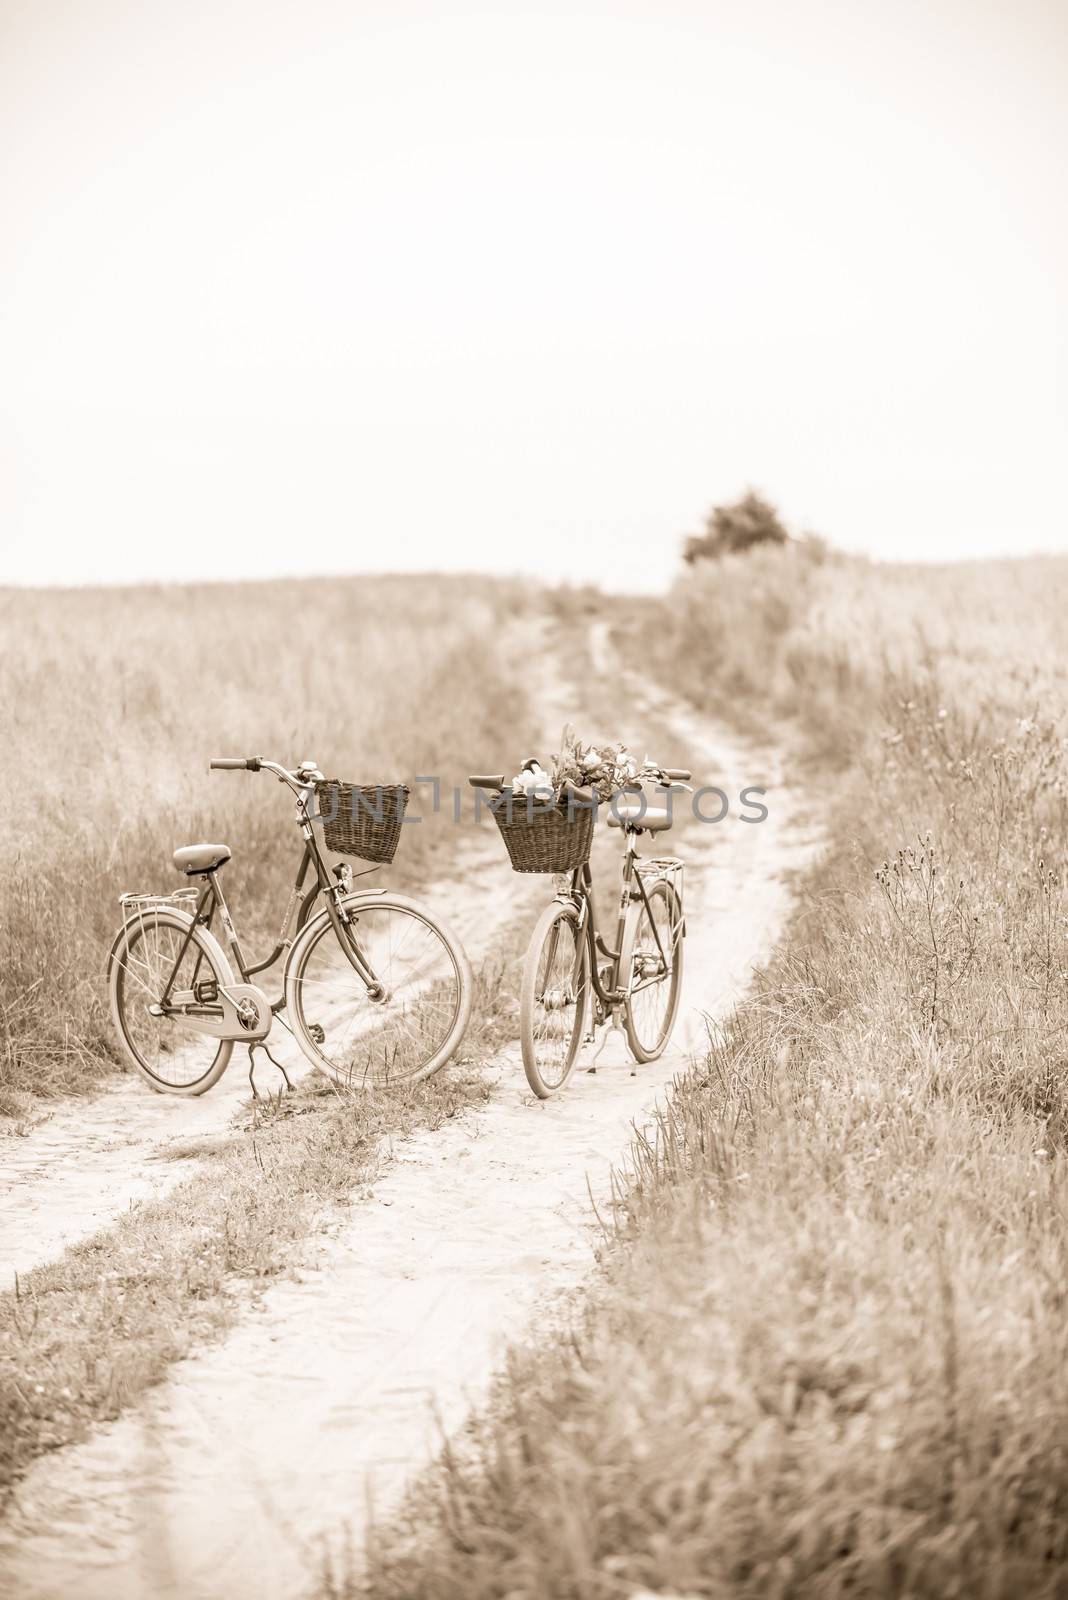 Photo presents two classic bicycles parked on dirt road, in one of bikes visible bunch of wild flowers, sepia photo.